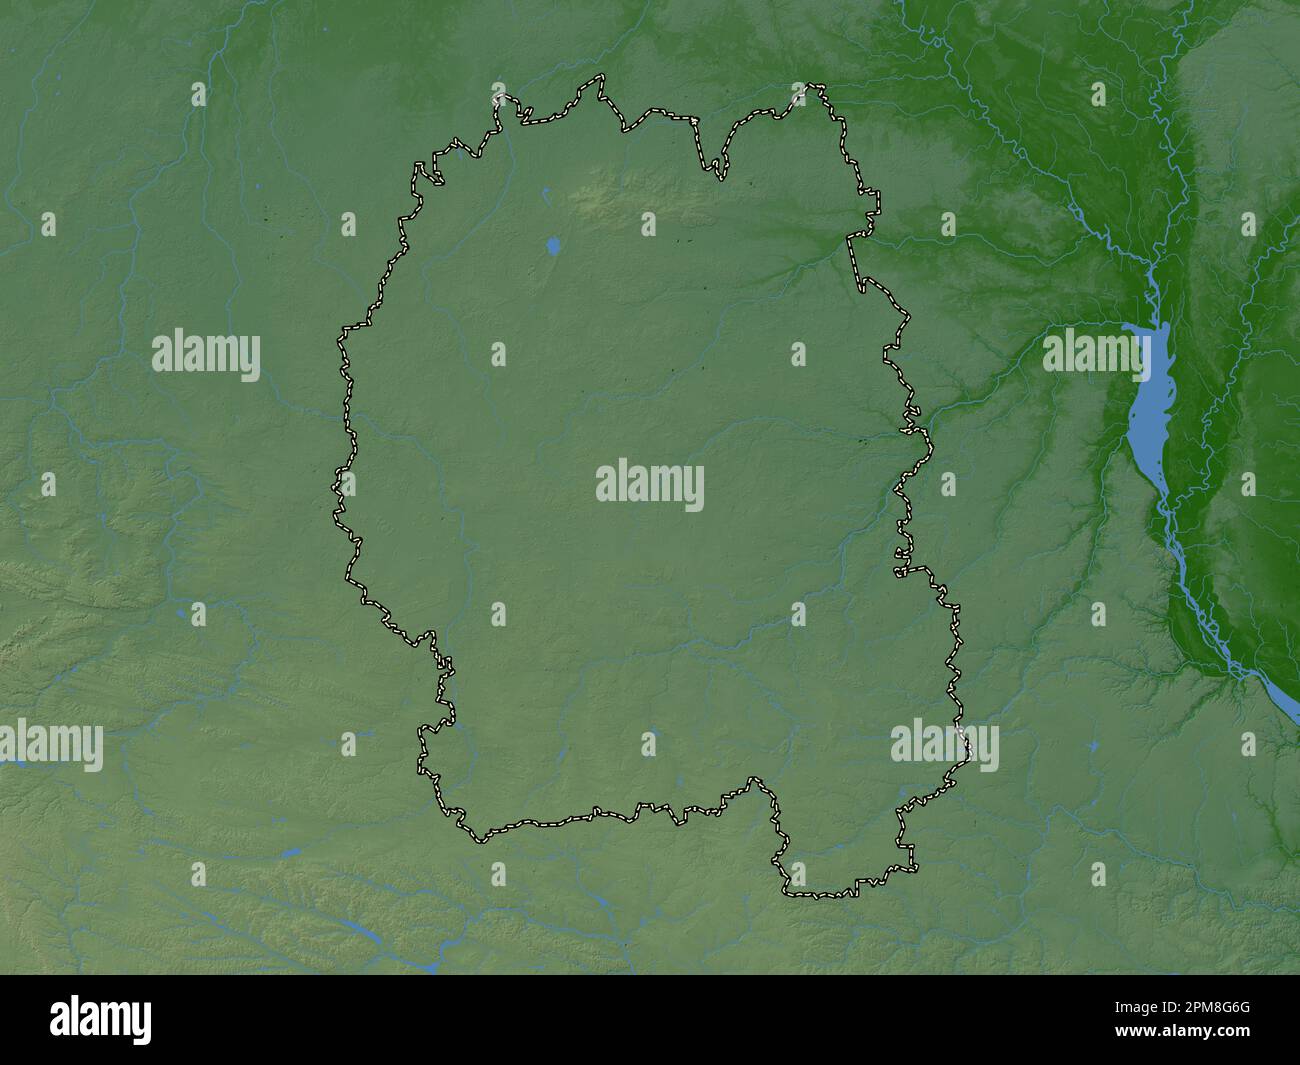 Zhytomyr, region of Ukraine. Colored elevation map with lakes and rivers Stock Photo